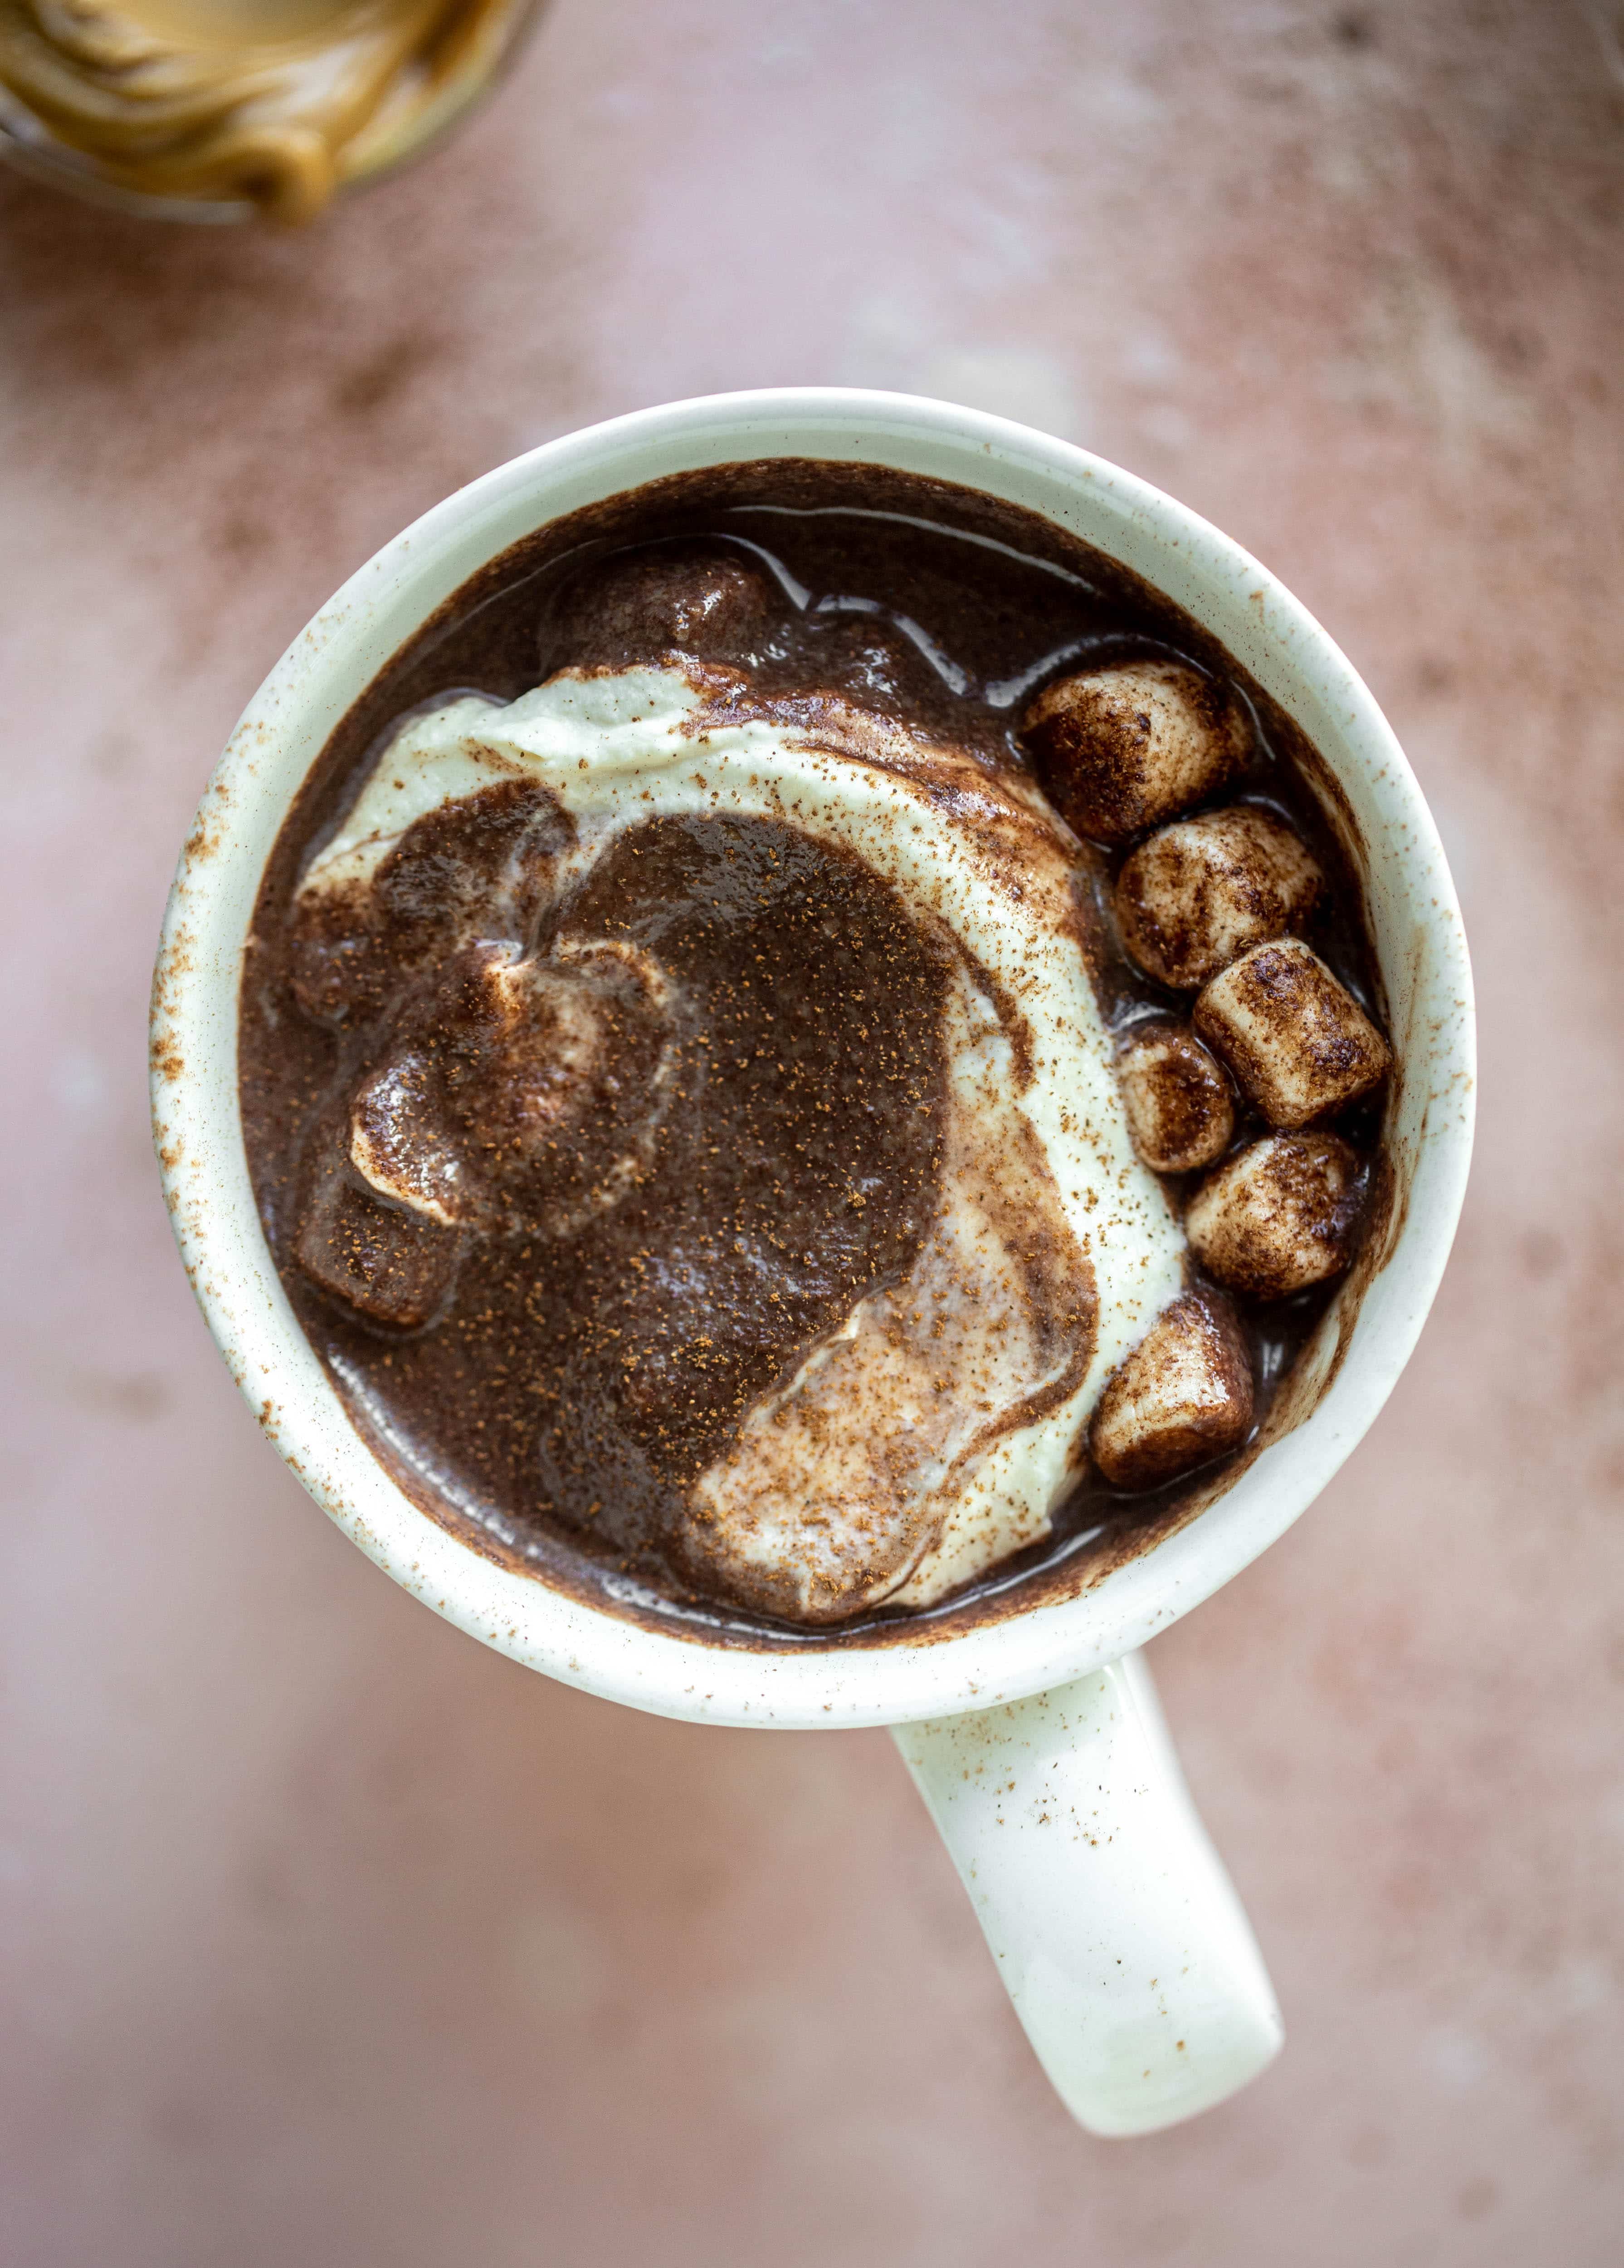 This salted peanut butter hot chocolate is a hug in a mug! It's super decadent, indulgent and cozy. Everyone's favorite flavors in one drink!